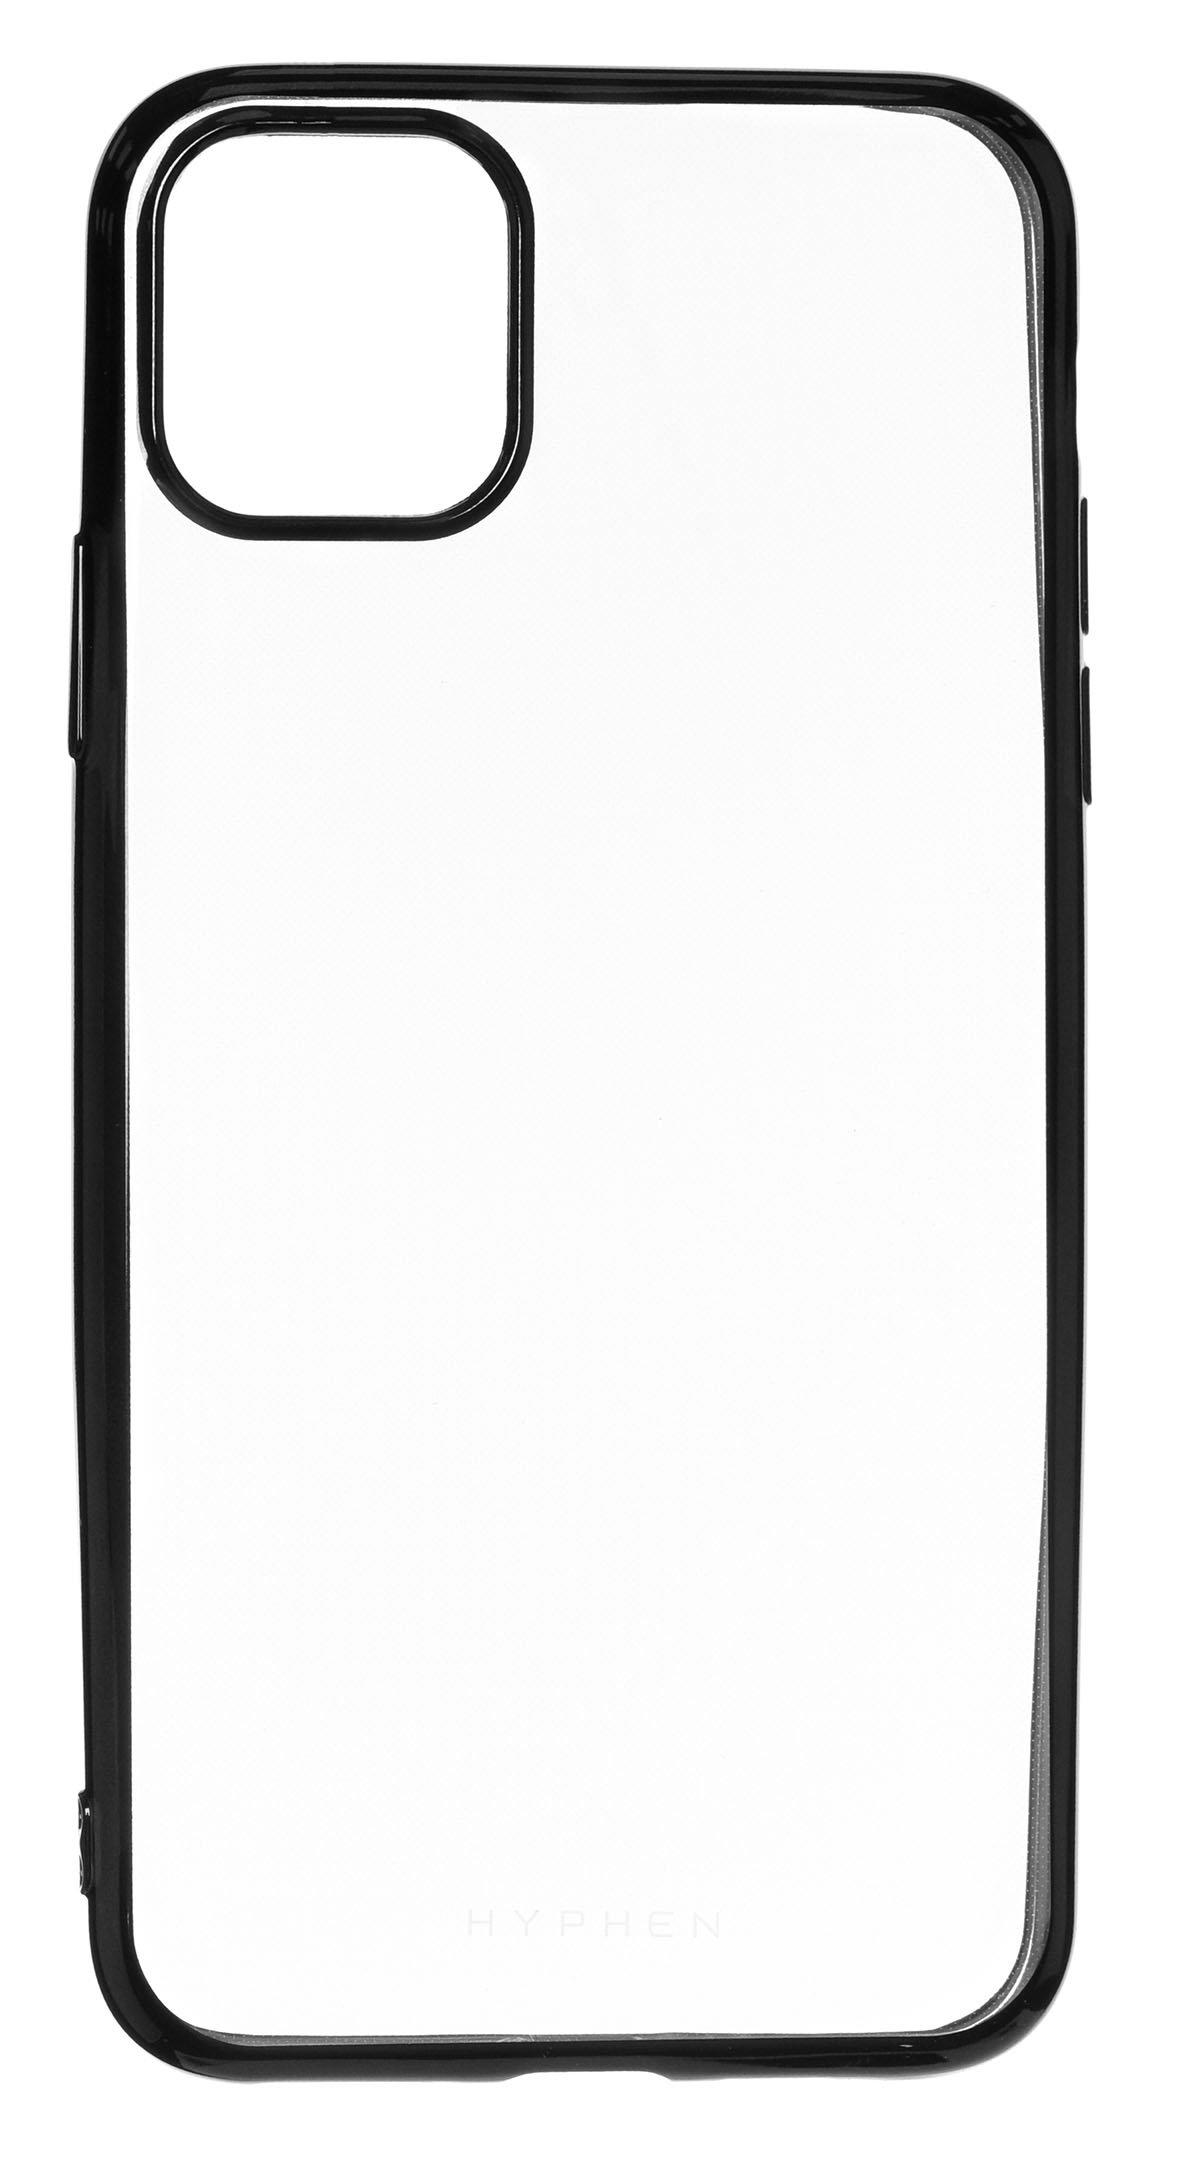 Hyphen Iphone 11 Pro Max Black Frame Case Clear Extra Saudi